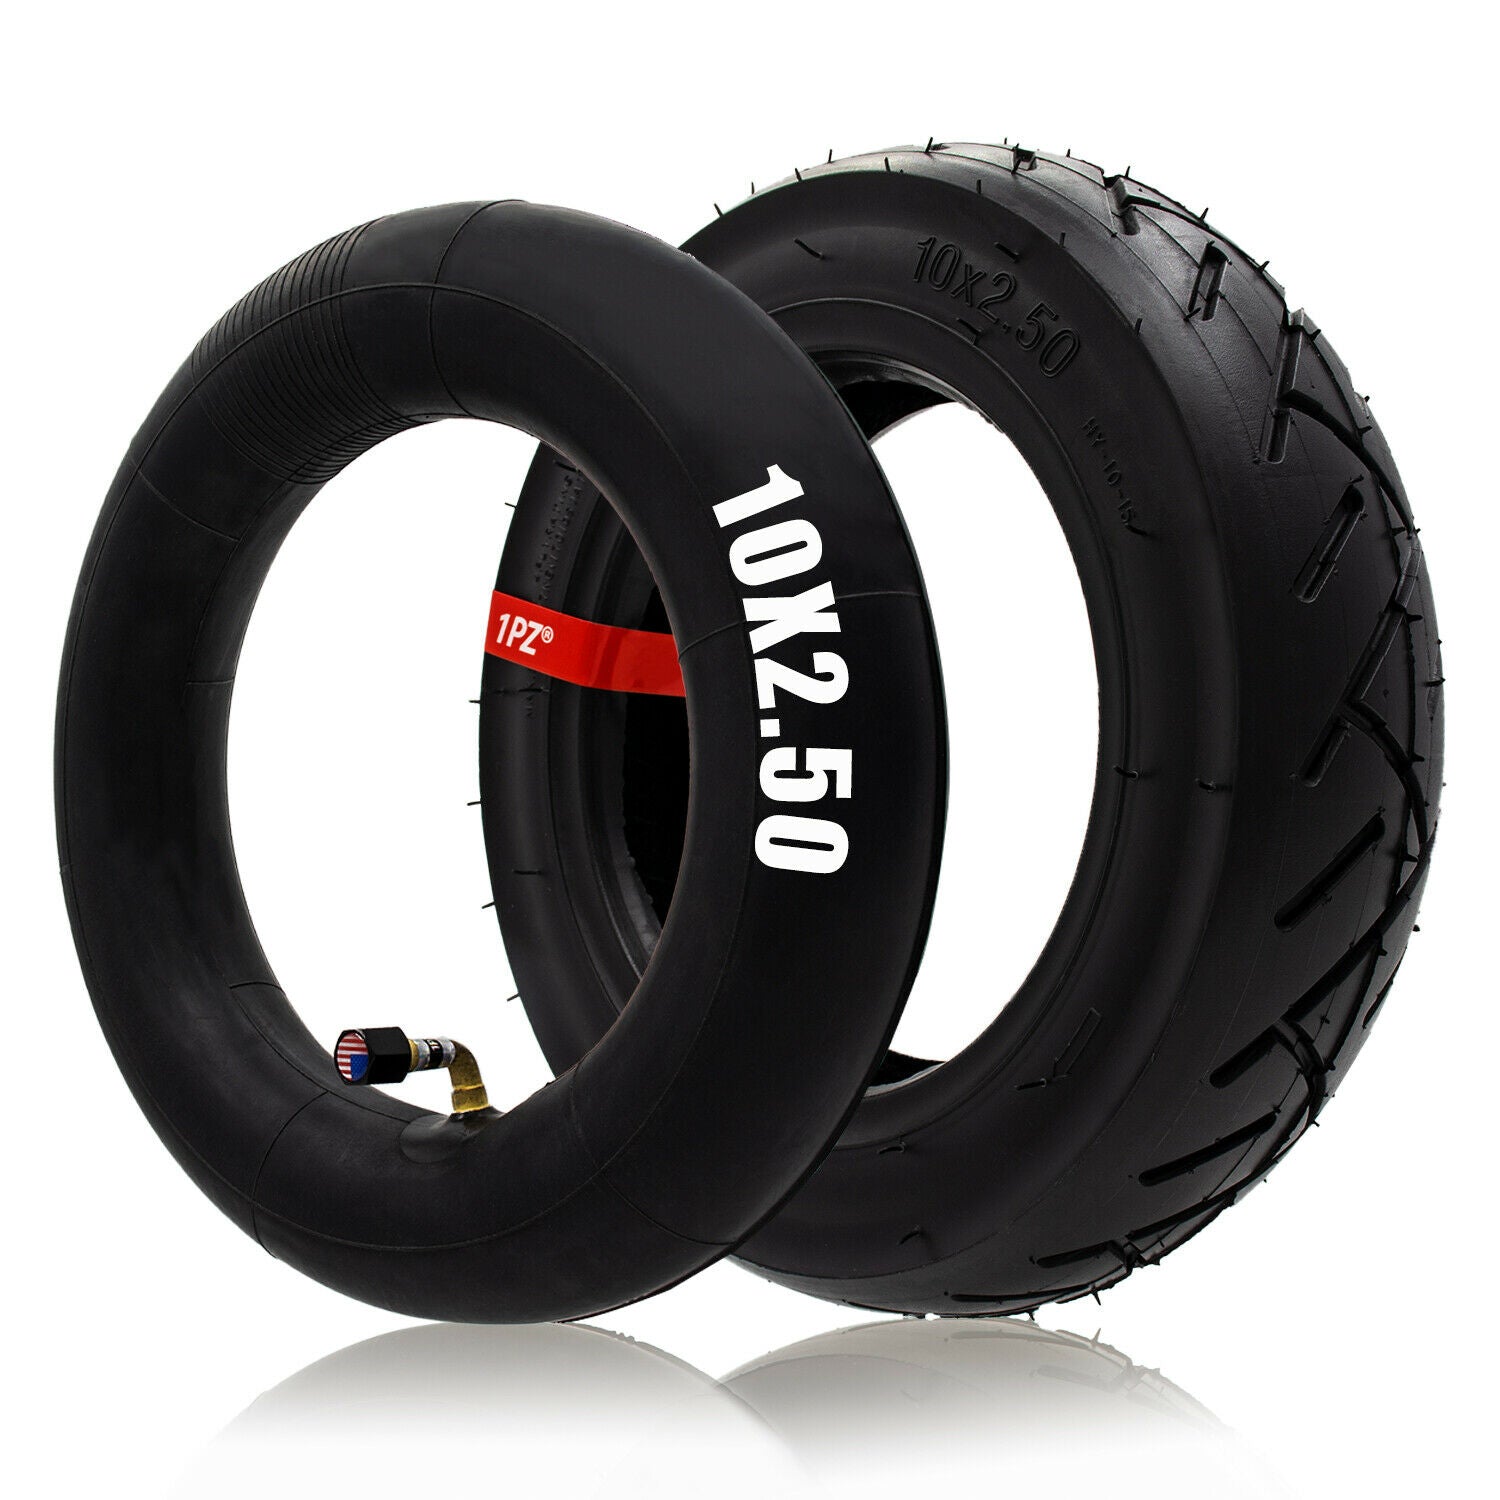 1PZ 10x2.50 Electric Scooter Tire & Inner Tube for 36v 48v 400w 500w 800w Hub Motor Balance Drive Bicycle